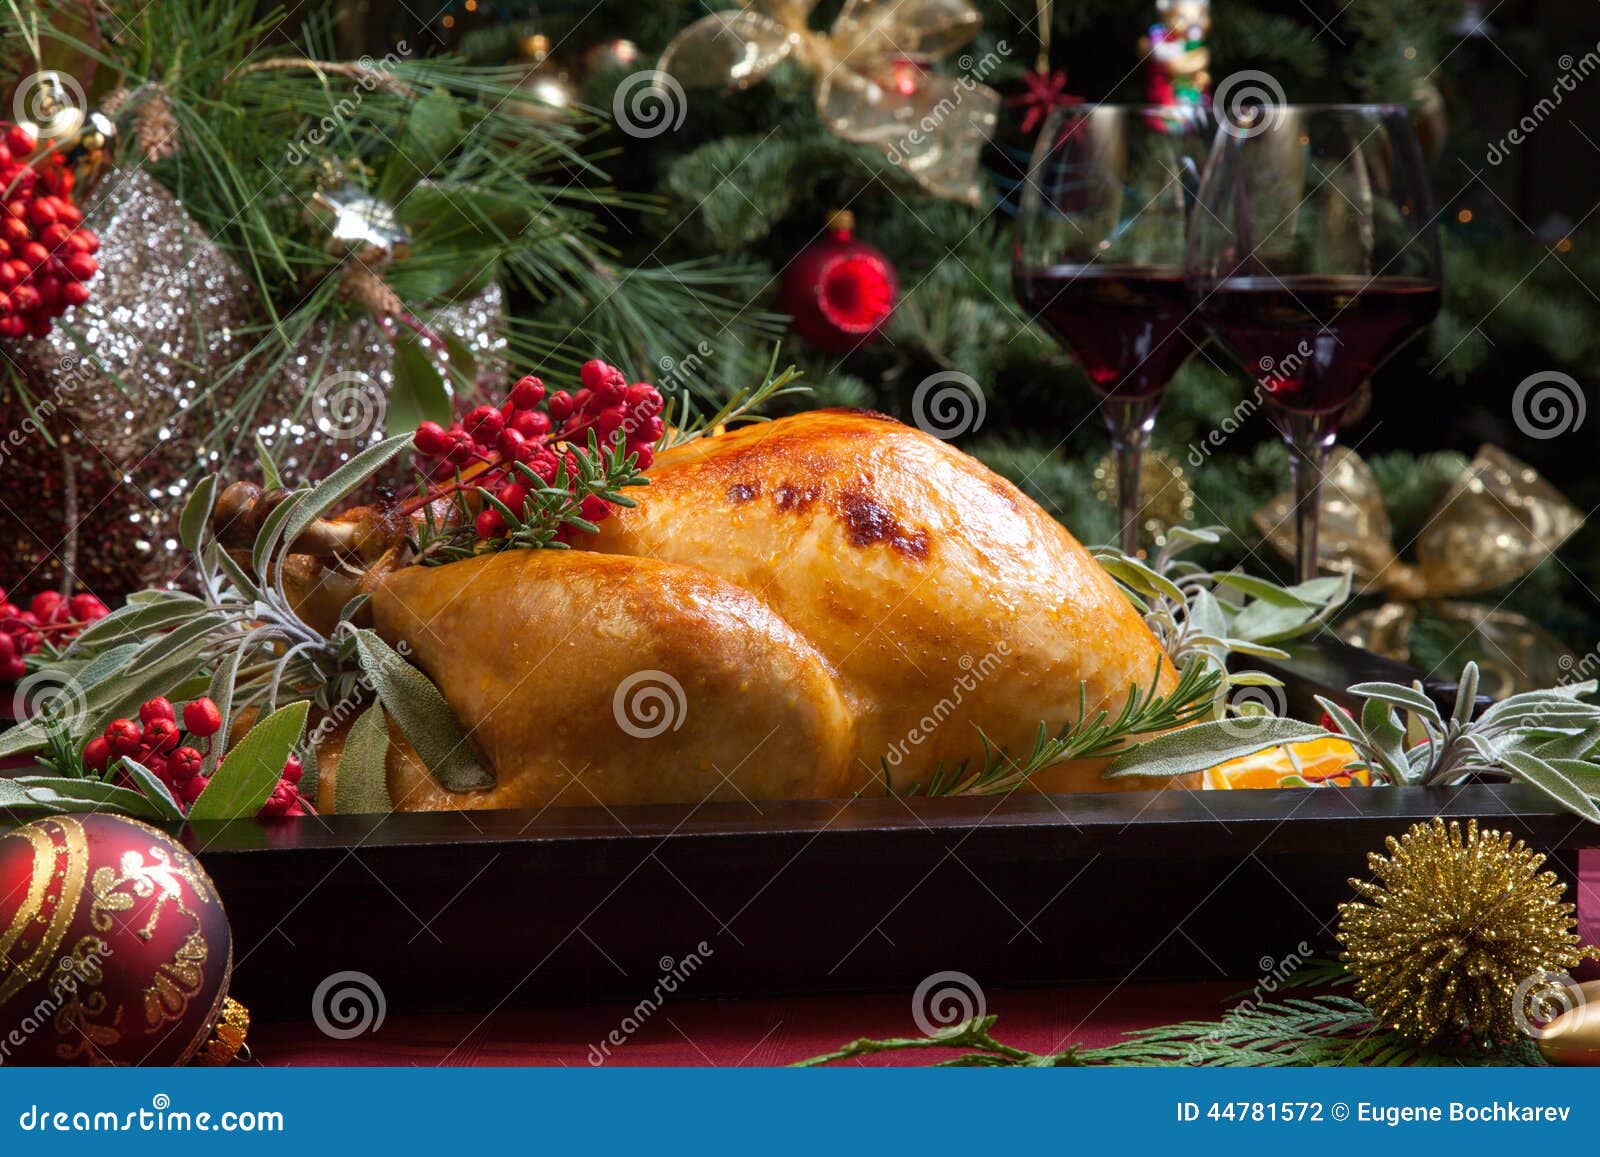 Christmas Turkey In Wooden Tray Stock Photo - Image: 44781572